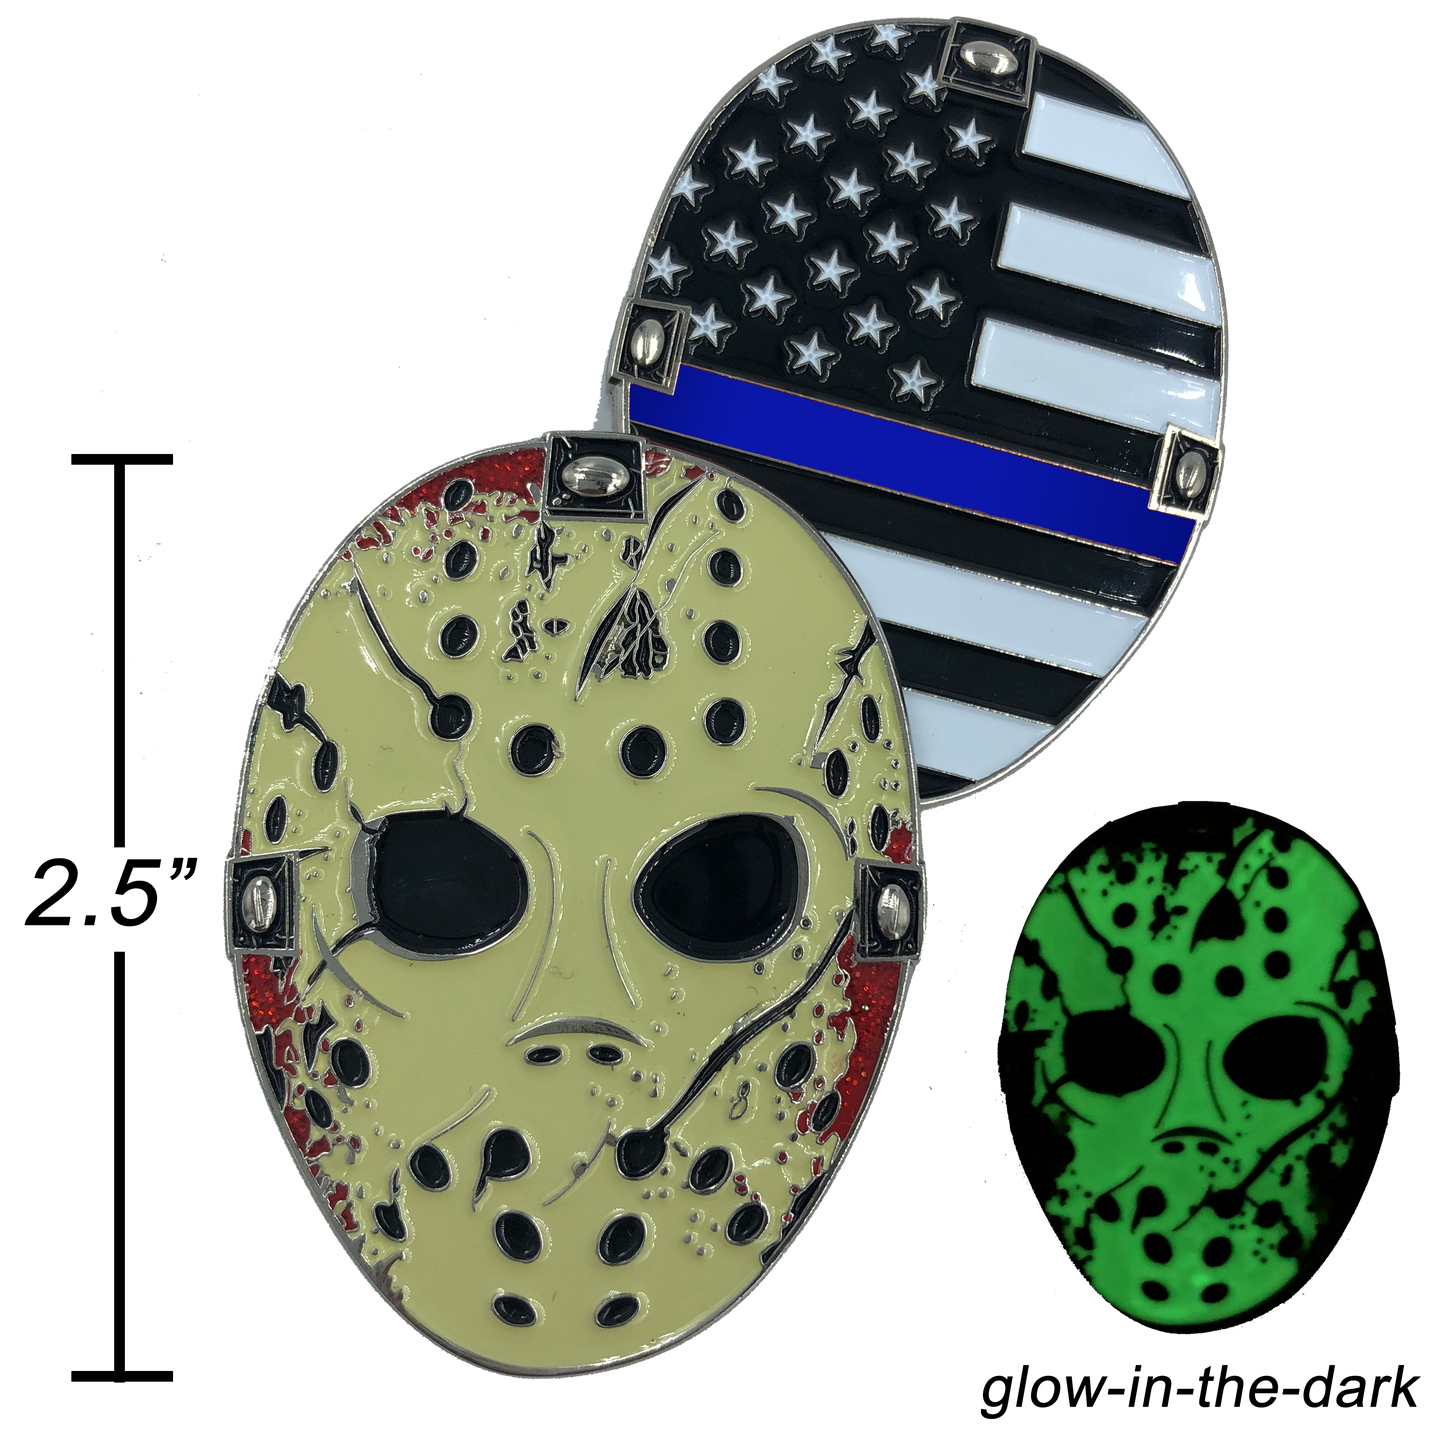 A-009 Thin Blue Line Jason Voorhees Challenge Coin Friday the 13th Police CBP FBI ATF NYPD LAPD Chicago